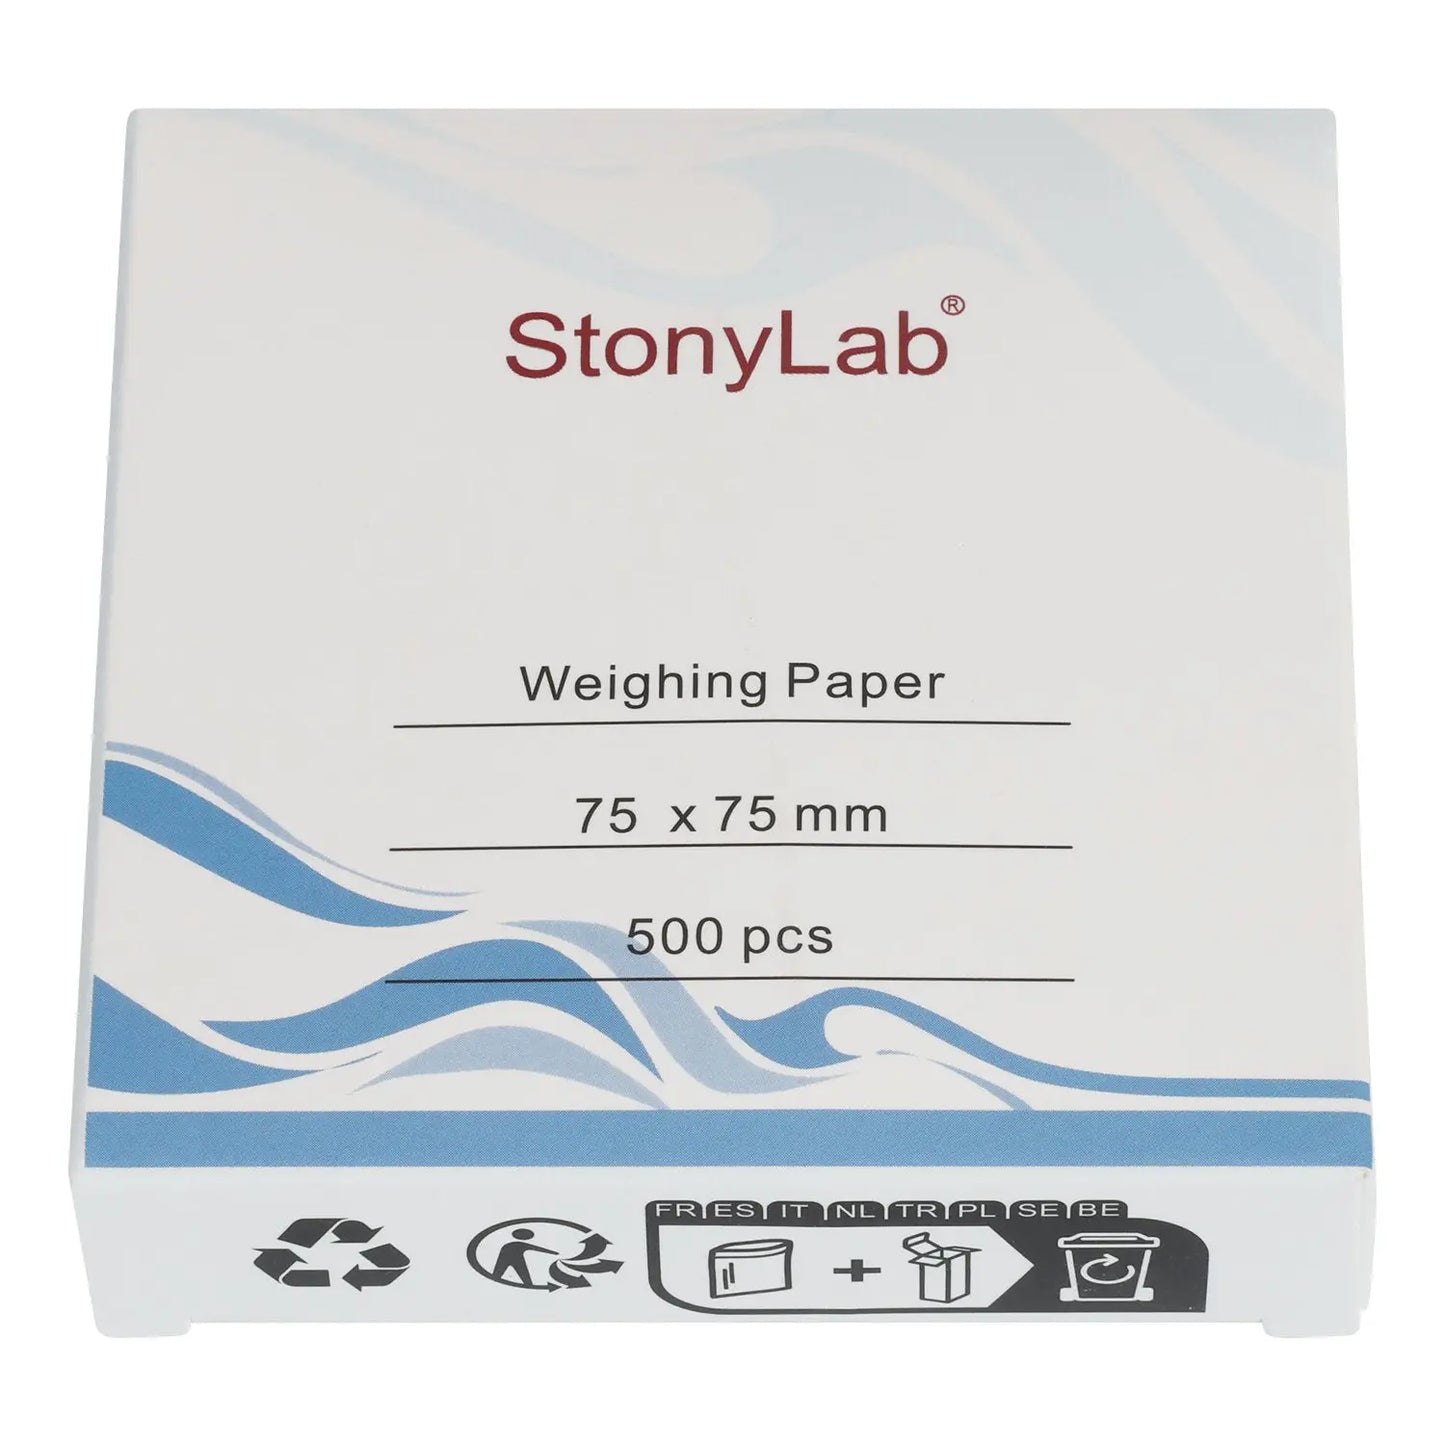 Nitrogen-Free Weighing Paper, Pack of 500 Weighing Paper